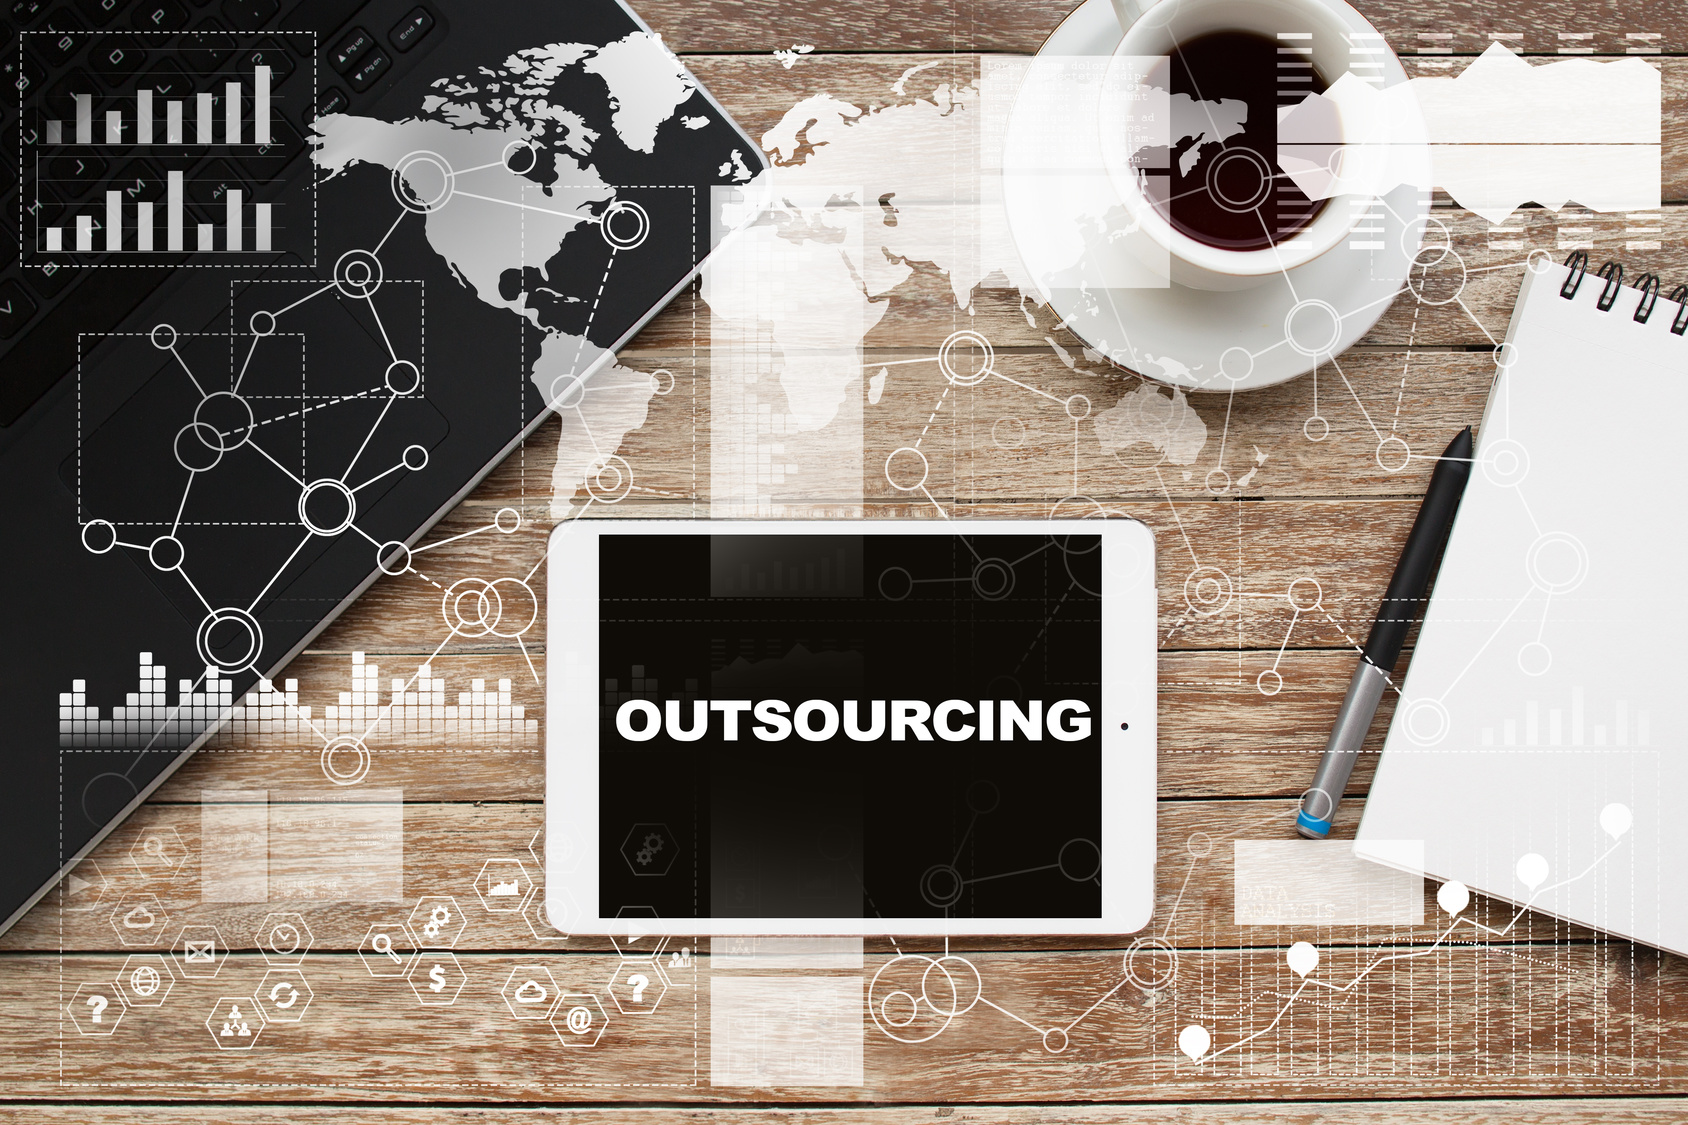 outsourcing benefits